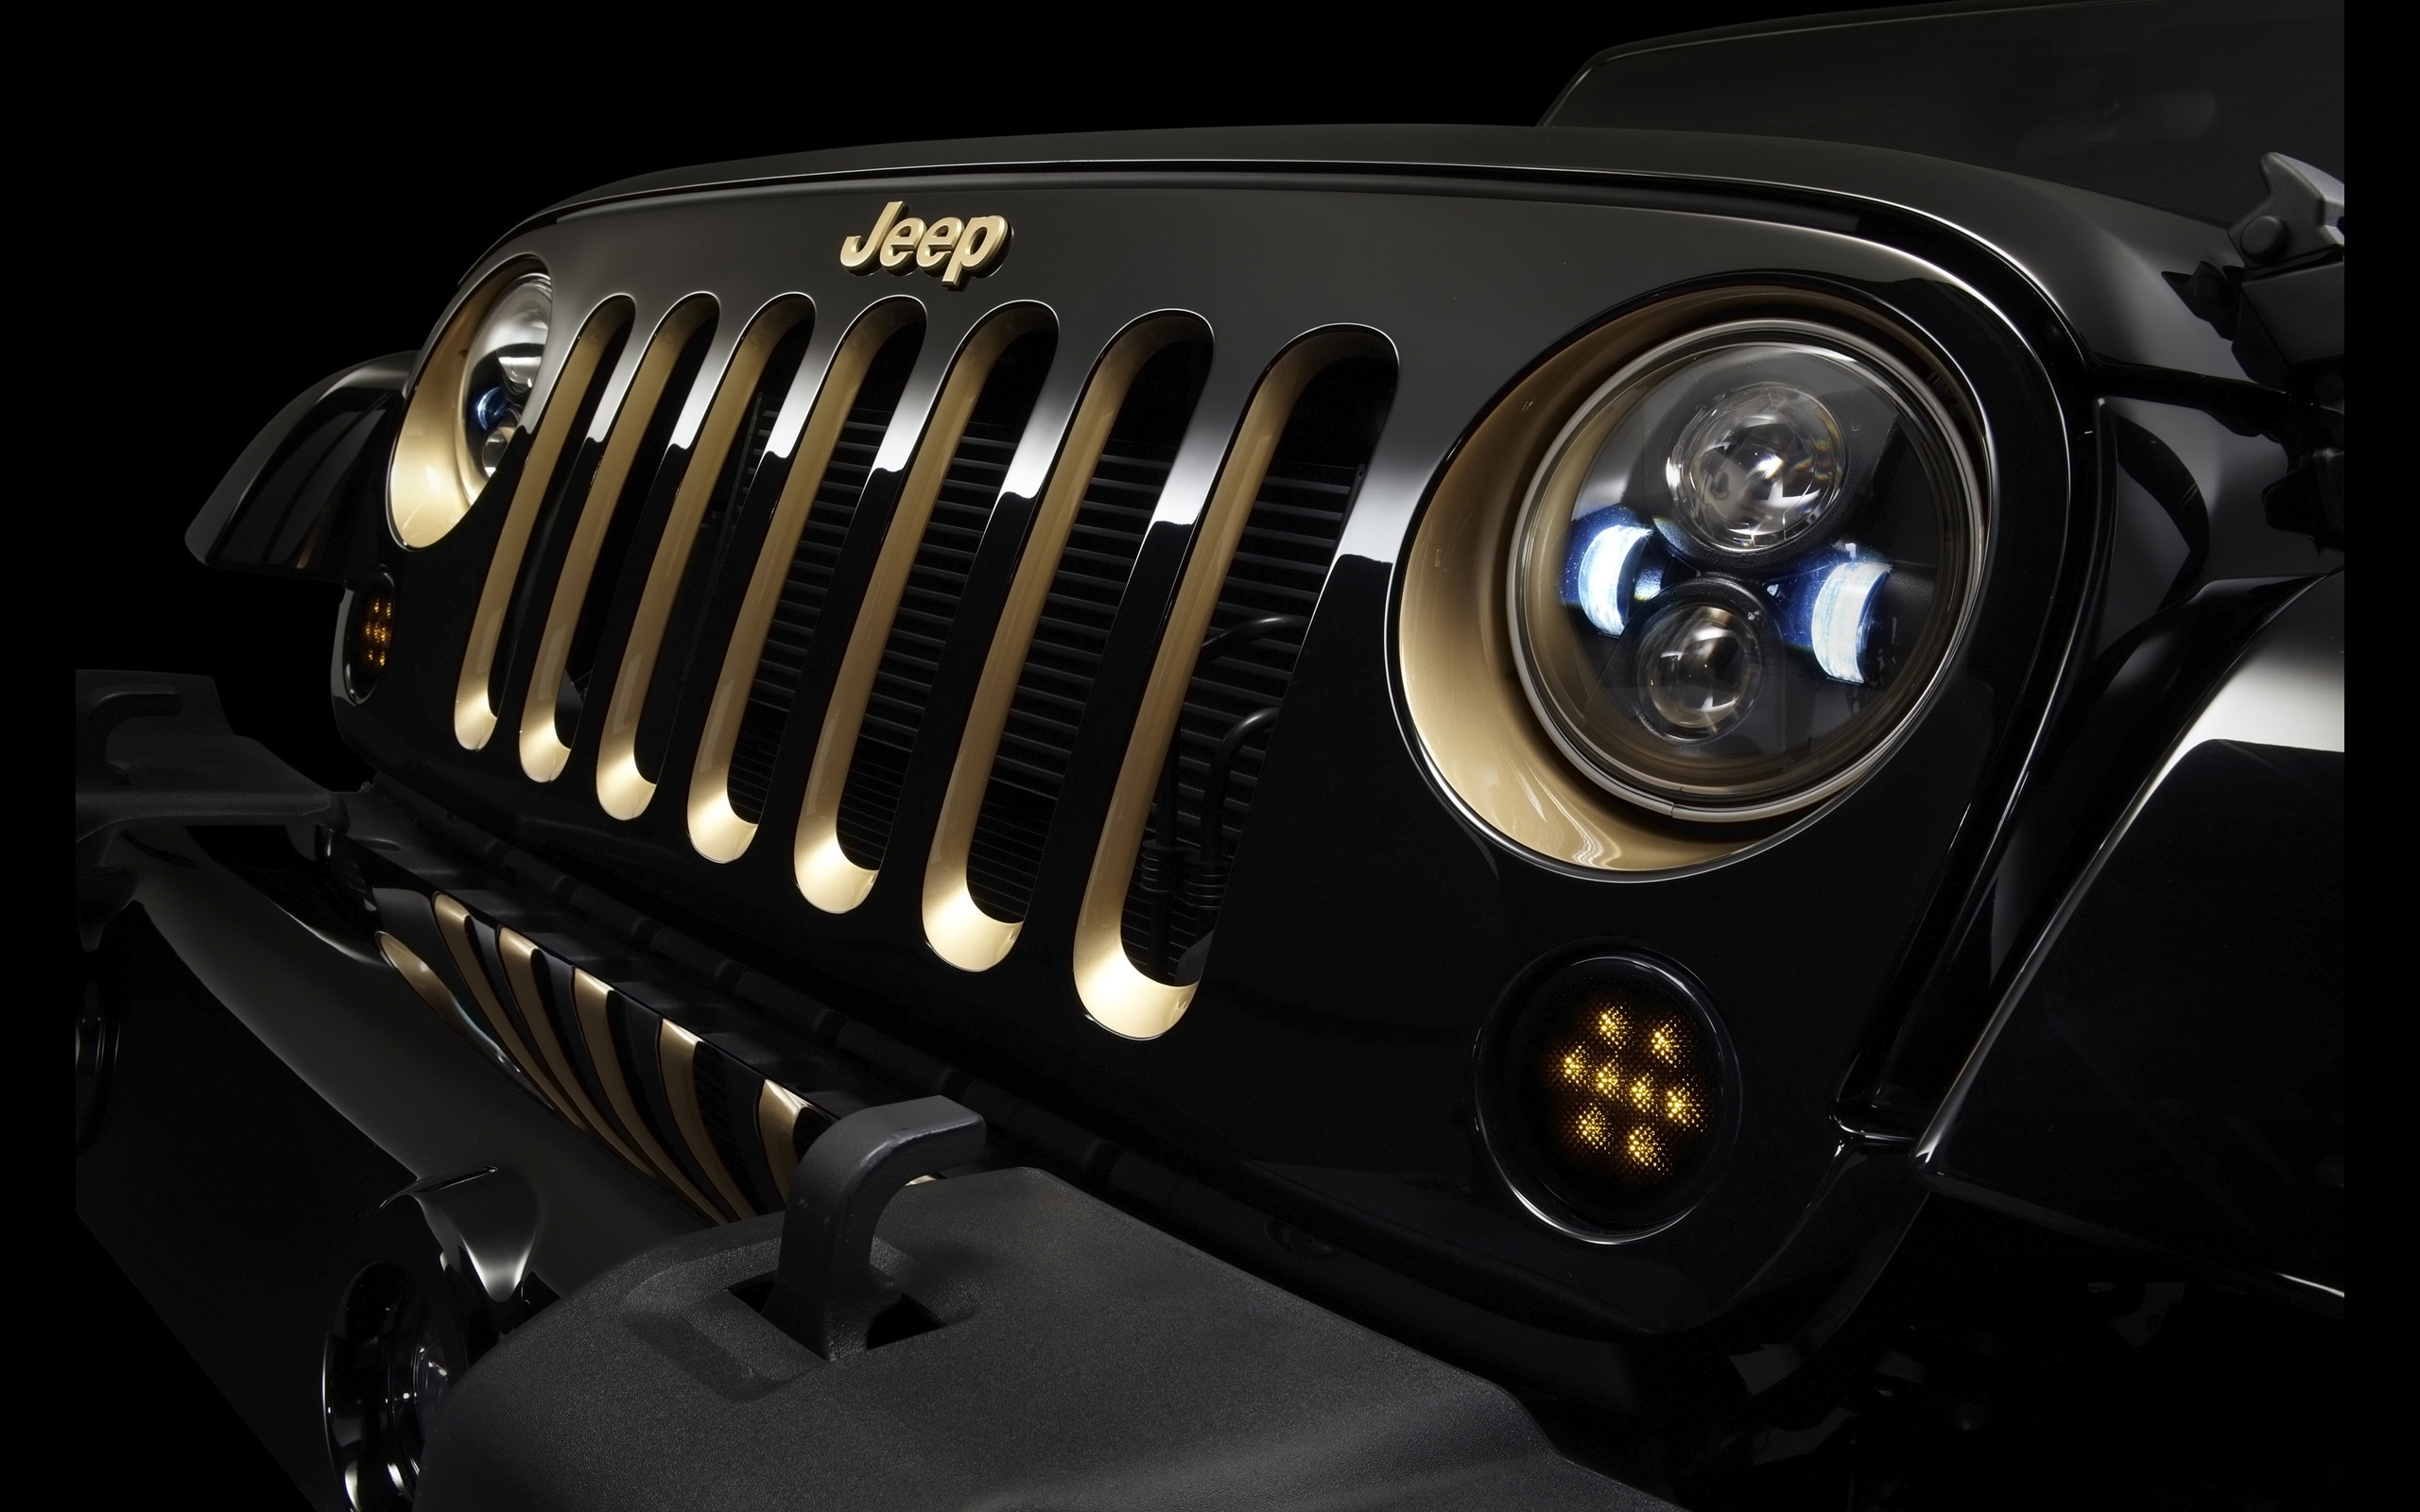 Wallpapers cars jeep wrangler dragon edition view from front on the desktop